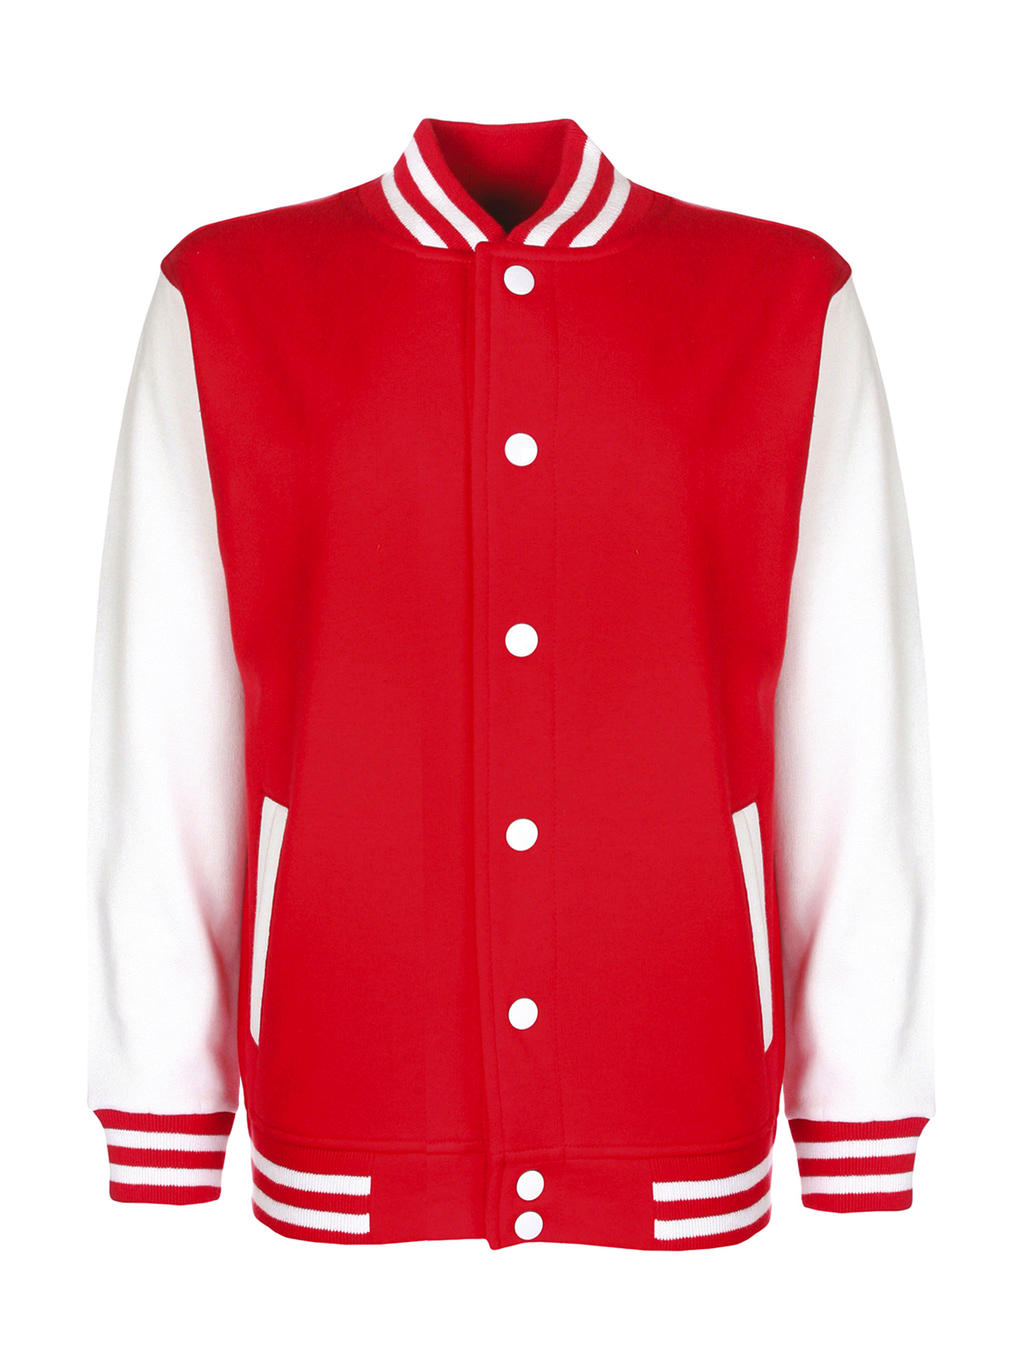  Junior Varsity Jacket in Farbe Fire Red/White